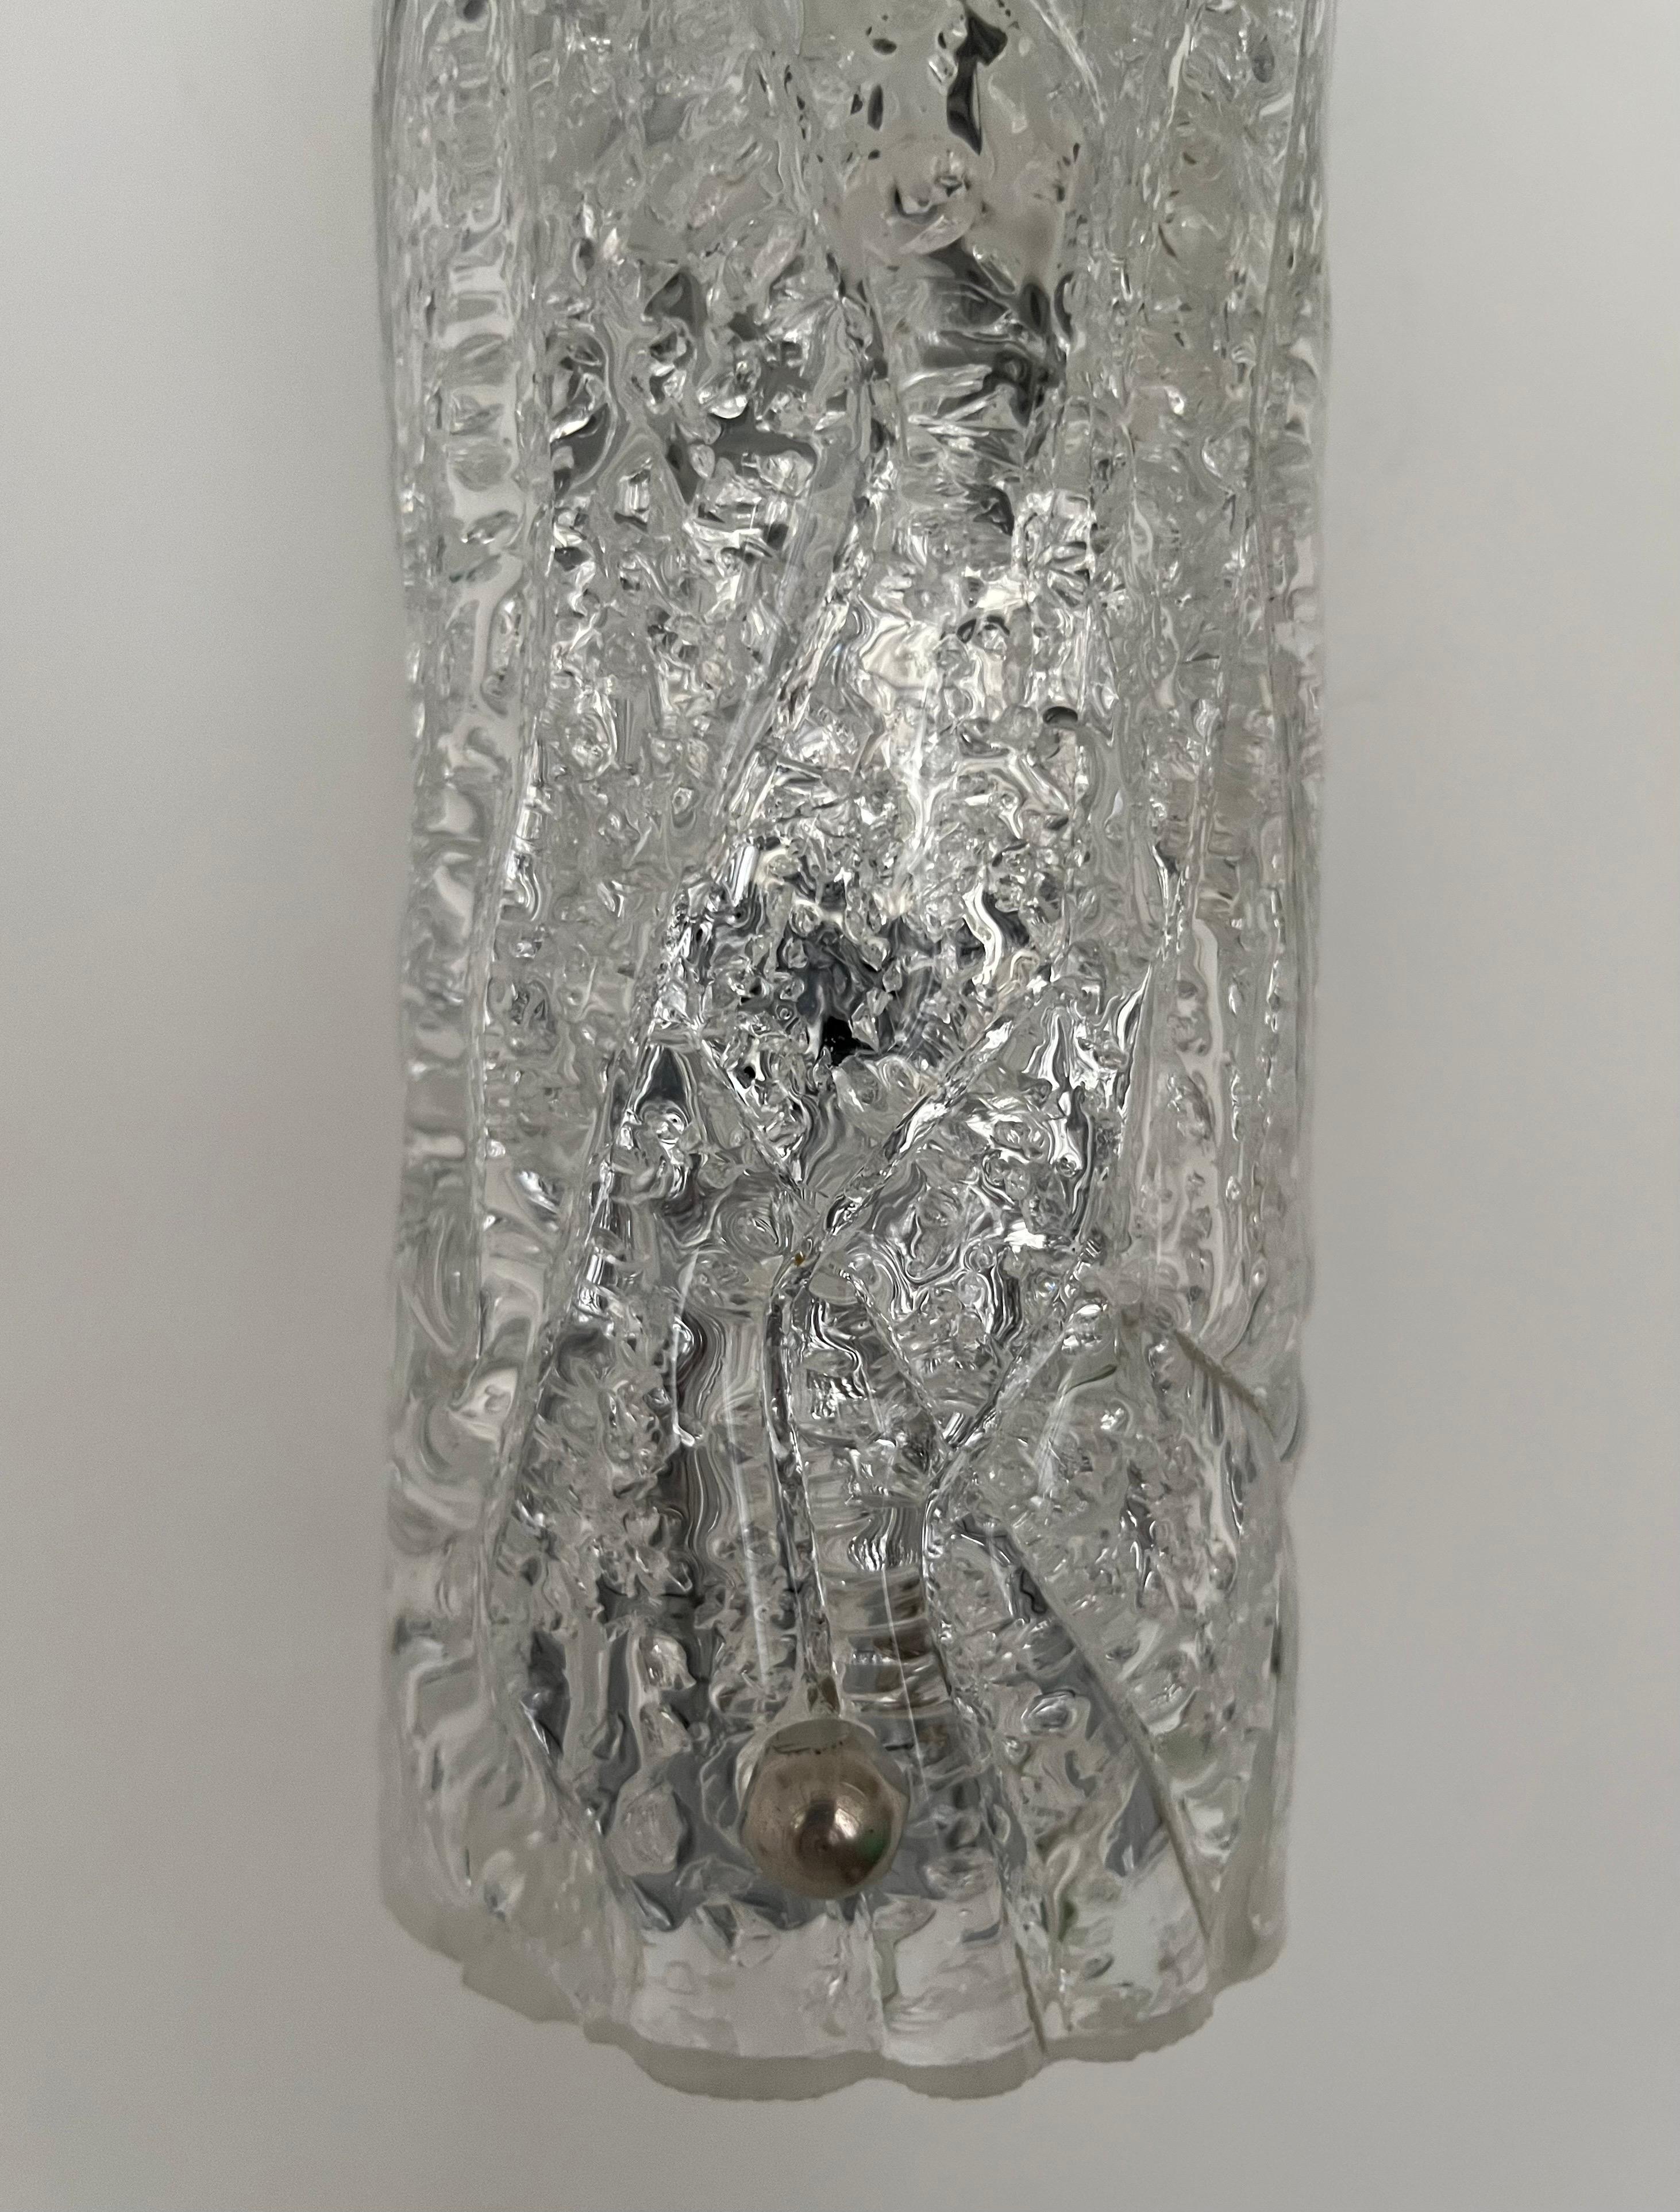 Stunning and beauty Pair of Murano Ice-glass Wall Sconces by Hillebrand Leuchten. These fixtures were designed and manufactured during the 1970s in Germany. Model 8527-211.
Each Wall Sconce is composed metal structure and a piece of Murano glass.